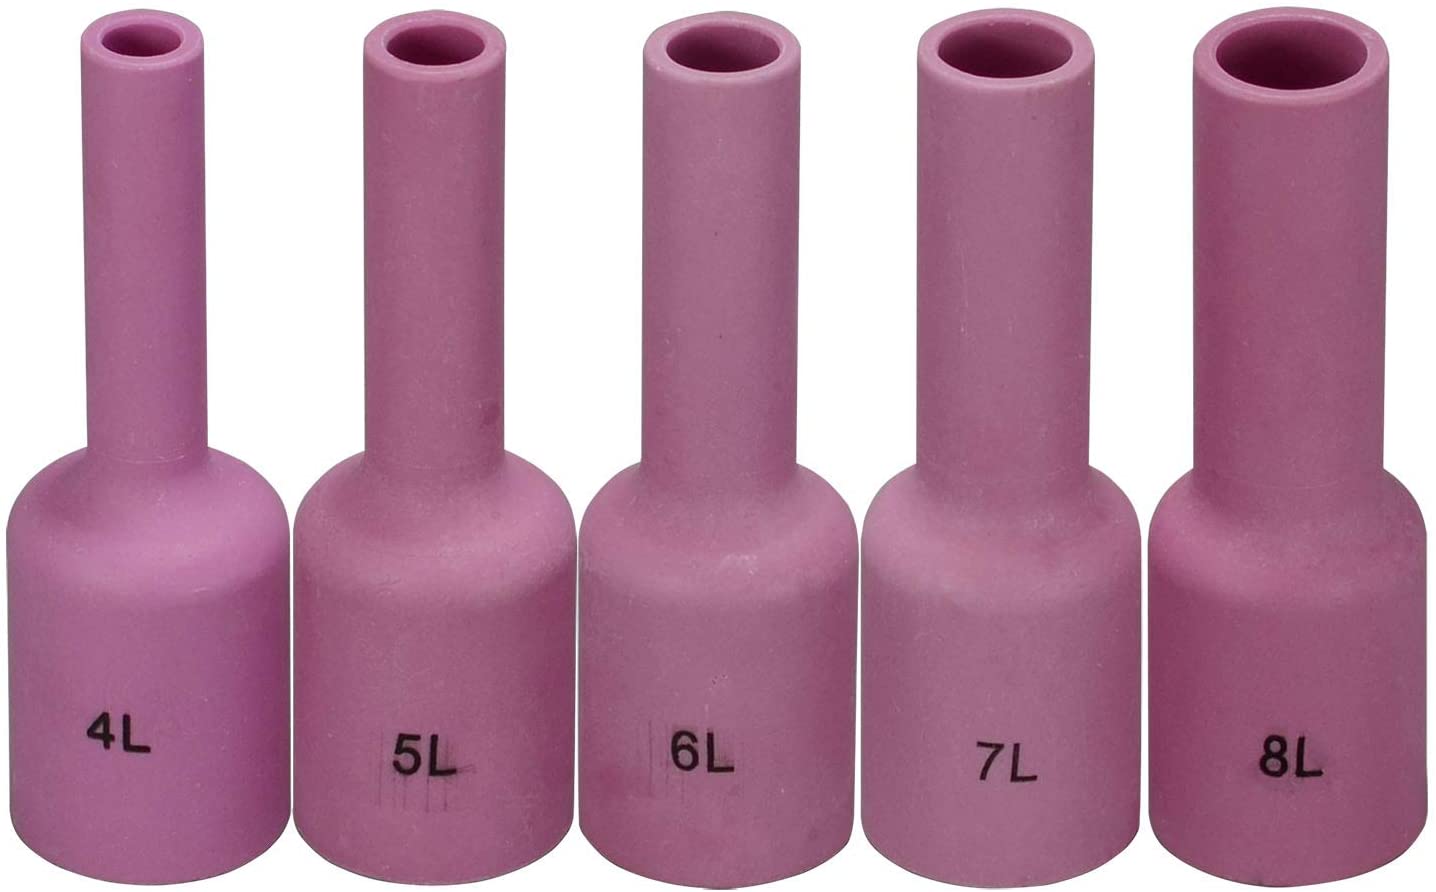 TIG Gas Lens Ceramic Cup Long Assorted Size Kit 54N18L (4L 1/4") 54N17L (#5L 5/16") 54N16L (#6L 3/8") 54N15L (#7L 7/16") 54N14L (8L# 1/2") Fit SR DTA DB WP 17 18 26 TIG Welding Torch 5pcs